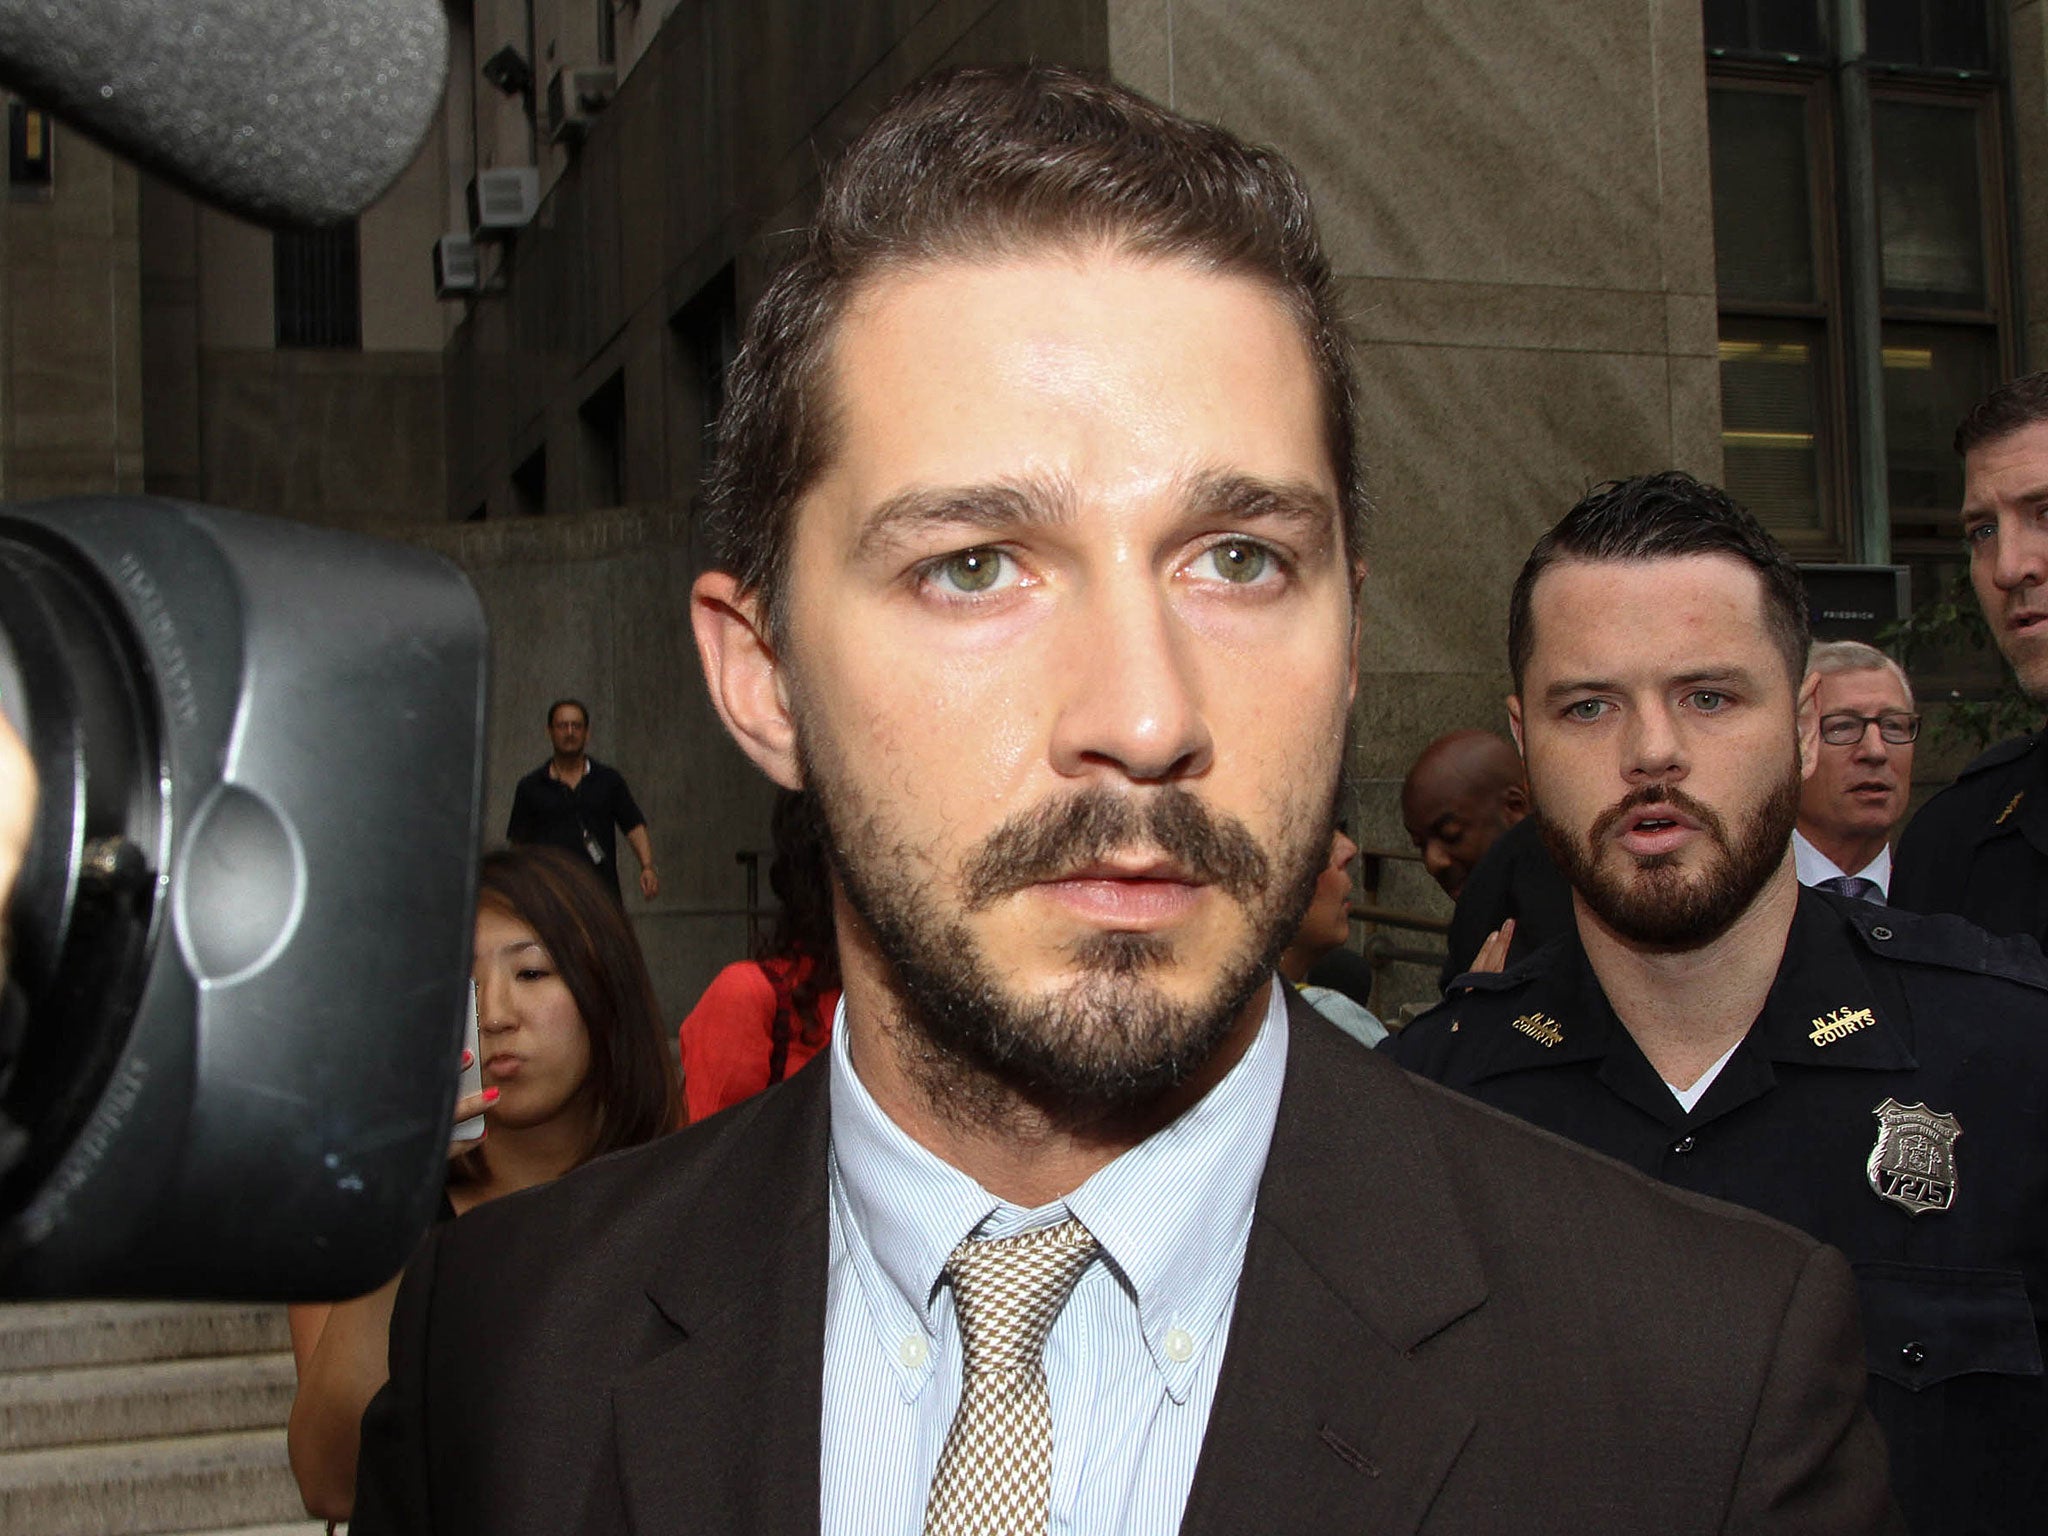 Shia LaBeouf leaves court on 24 July, 2014, in New York City